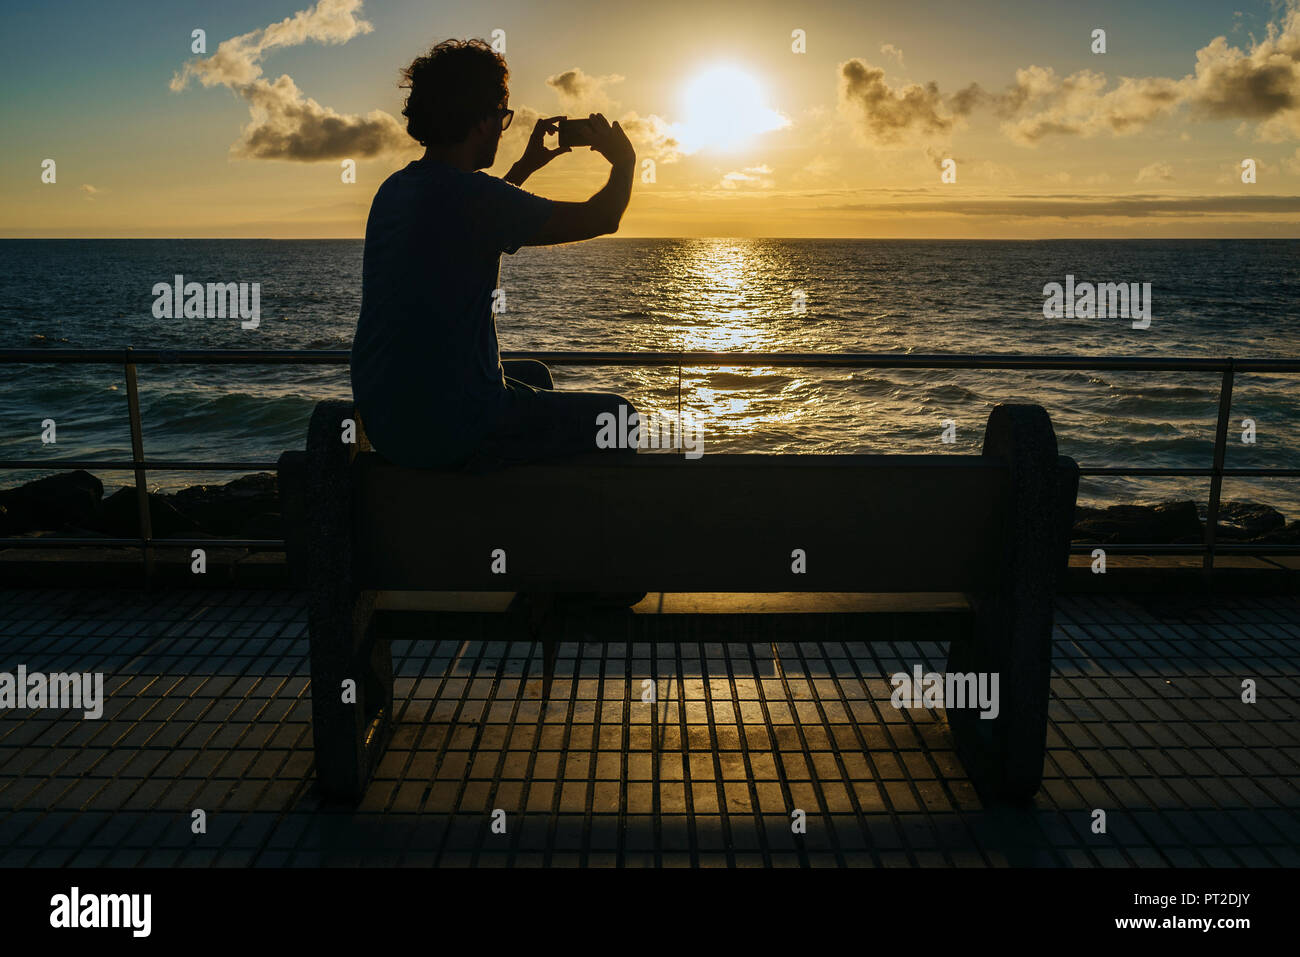 Spain, Canary Islands, Gran Canaria, Man taking a photo with mobile phone at sunset Stock Photo